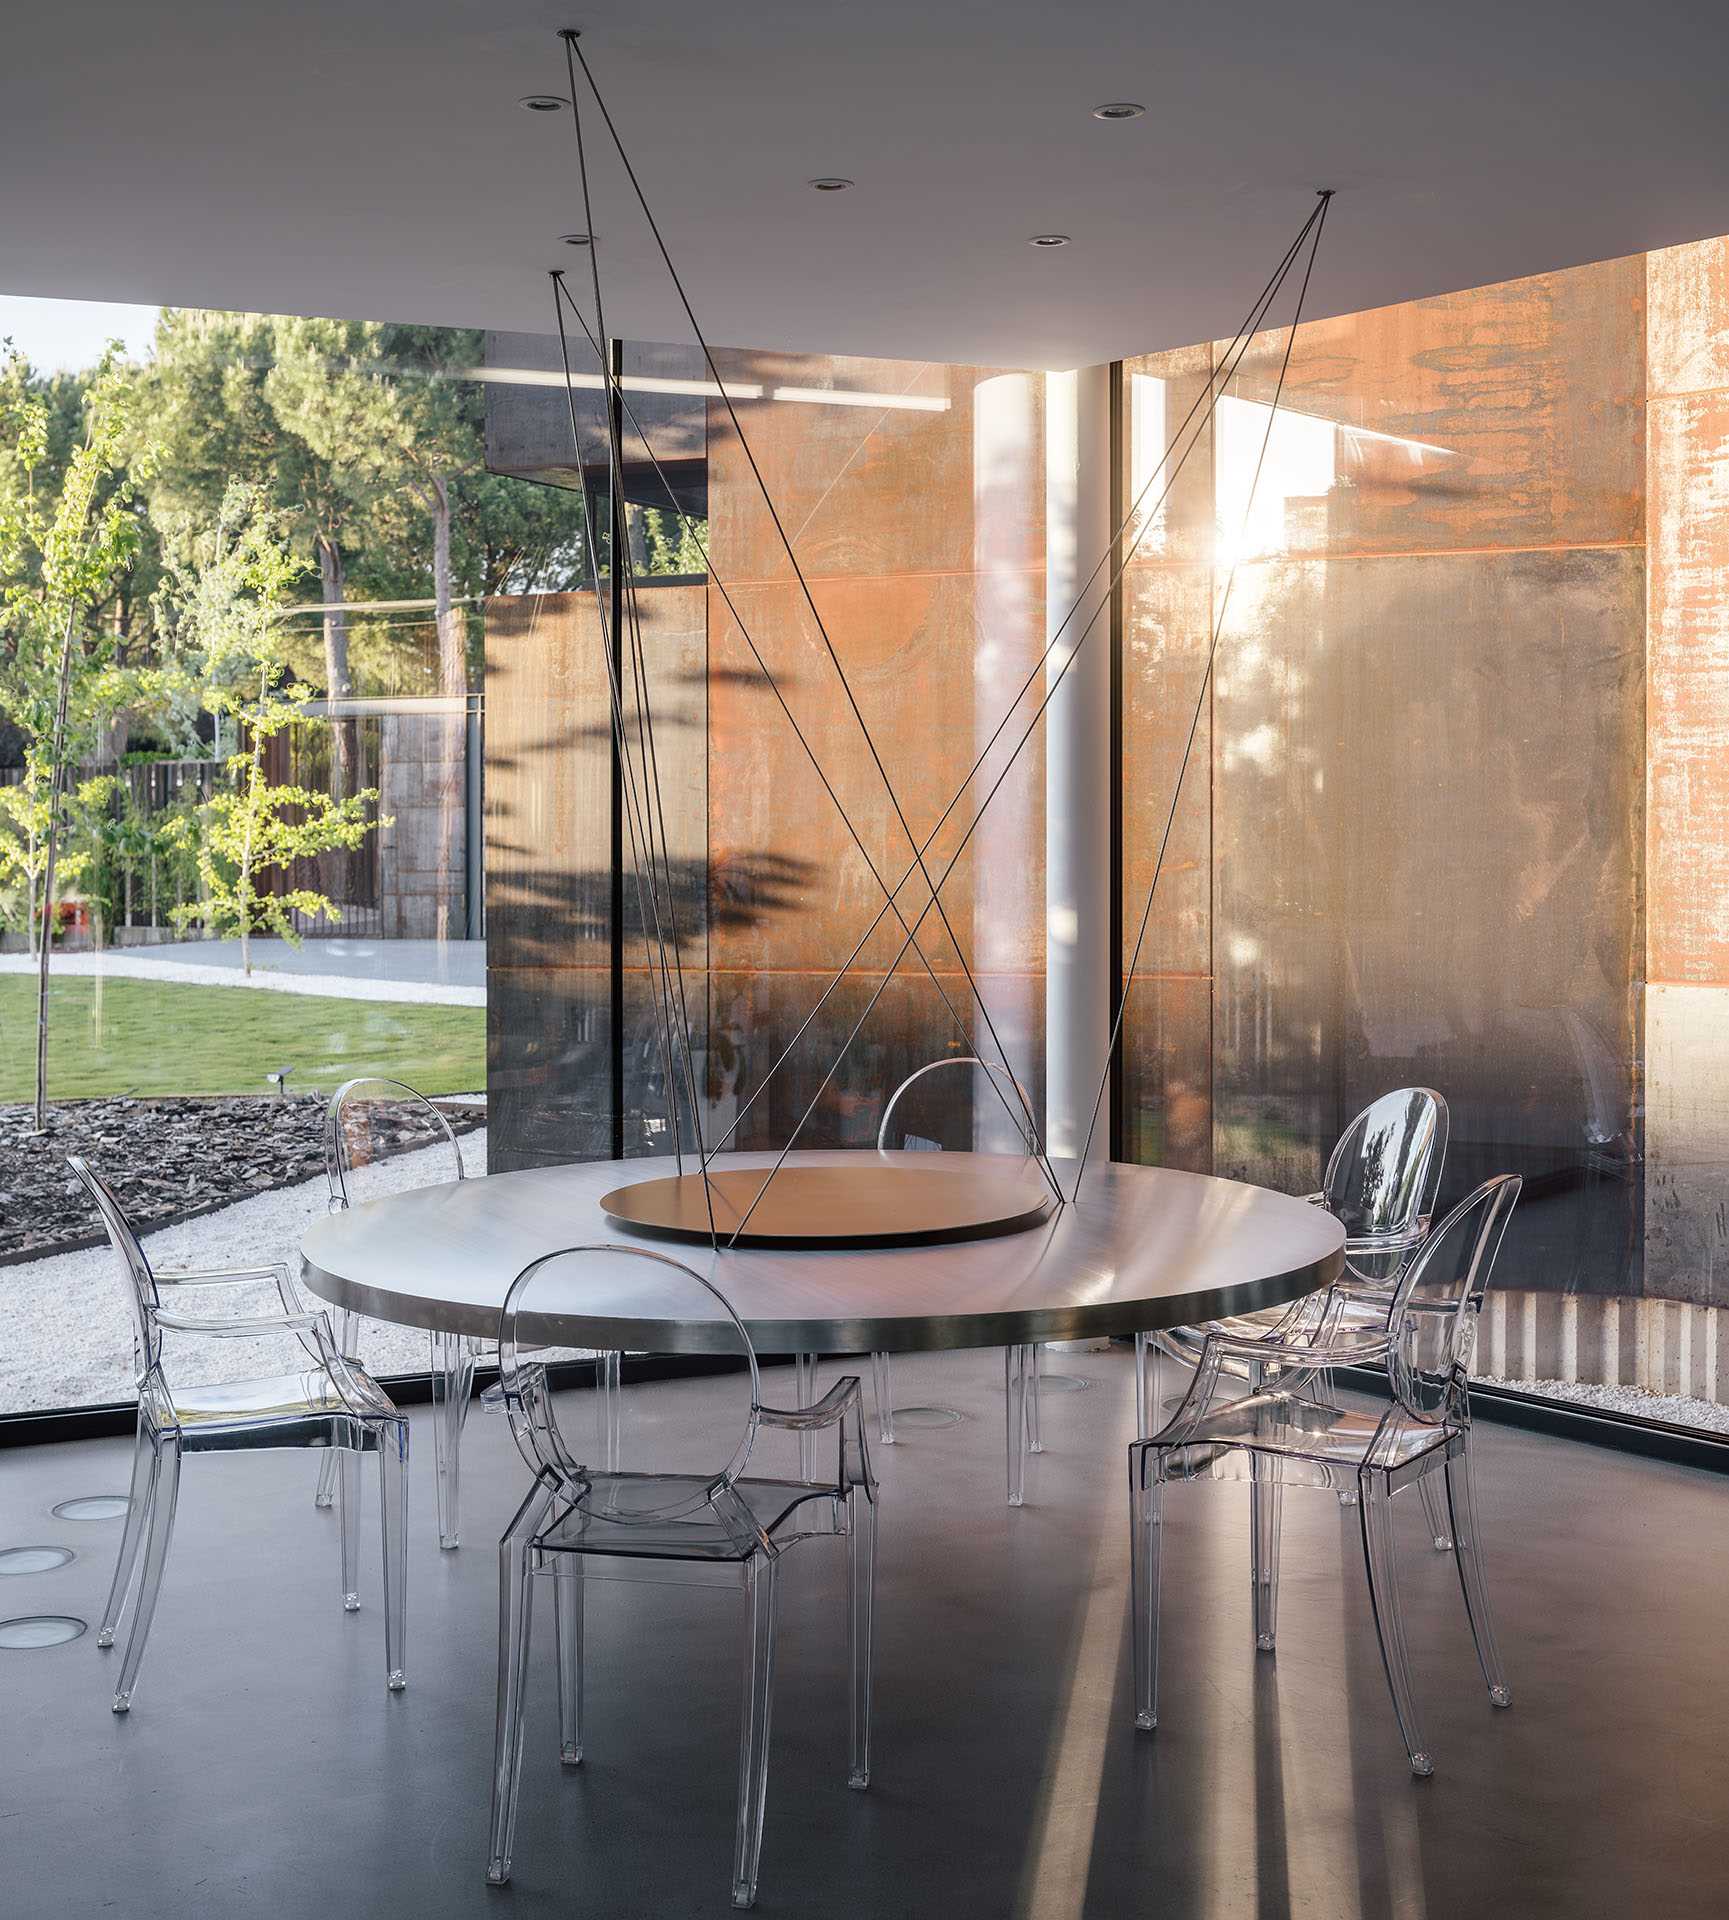 In the dining room, the table is suspended by cables from the ceiling, creating a unique sculptural element that's also functional.